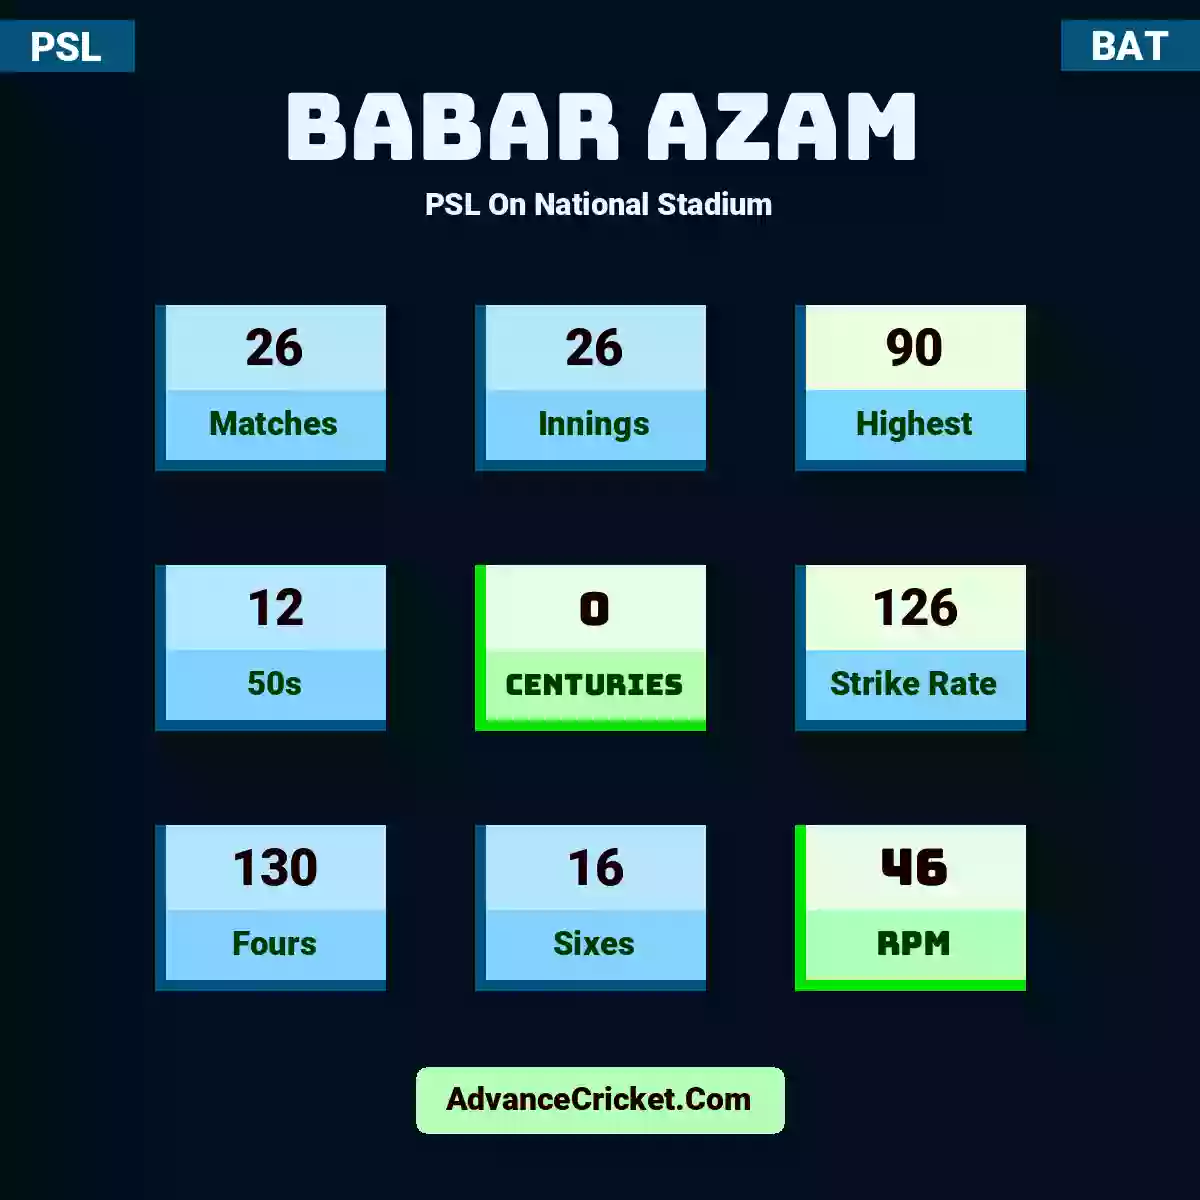 Babar Azam PSL  On National Stadium, Babar Azam played 26 matches, scored 90 runs as highest, 12 half-centuries, and 0 centuries, with a strike rate of 126. B.Azam hit 130 fours and 16 sixes, with an RPM of 46.